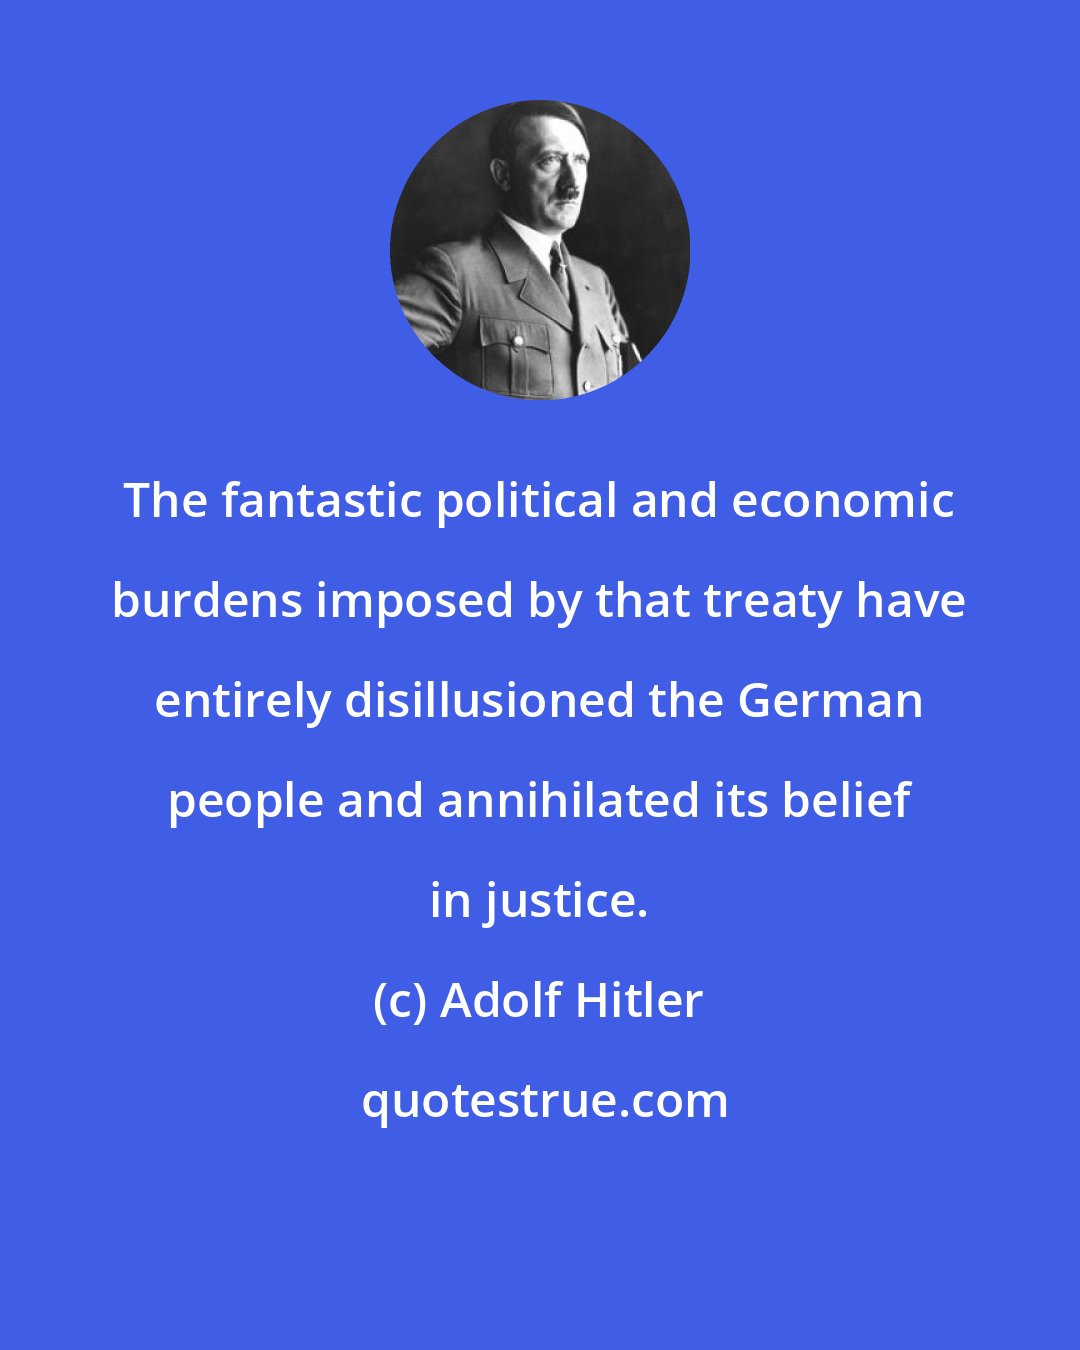 Adolf Hitler: The fantastic political and economic burdens imposed by that treaty have entirely disillusioned the German people and annihilated its belief in justice.